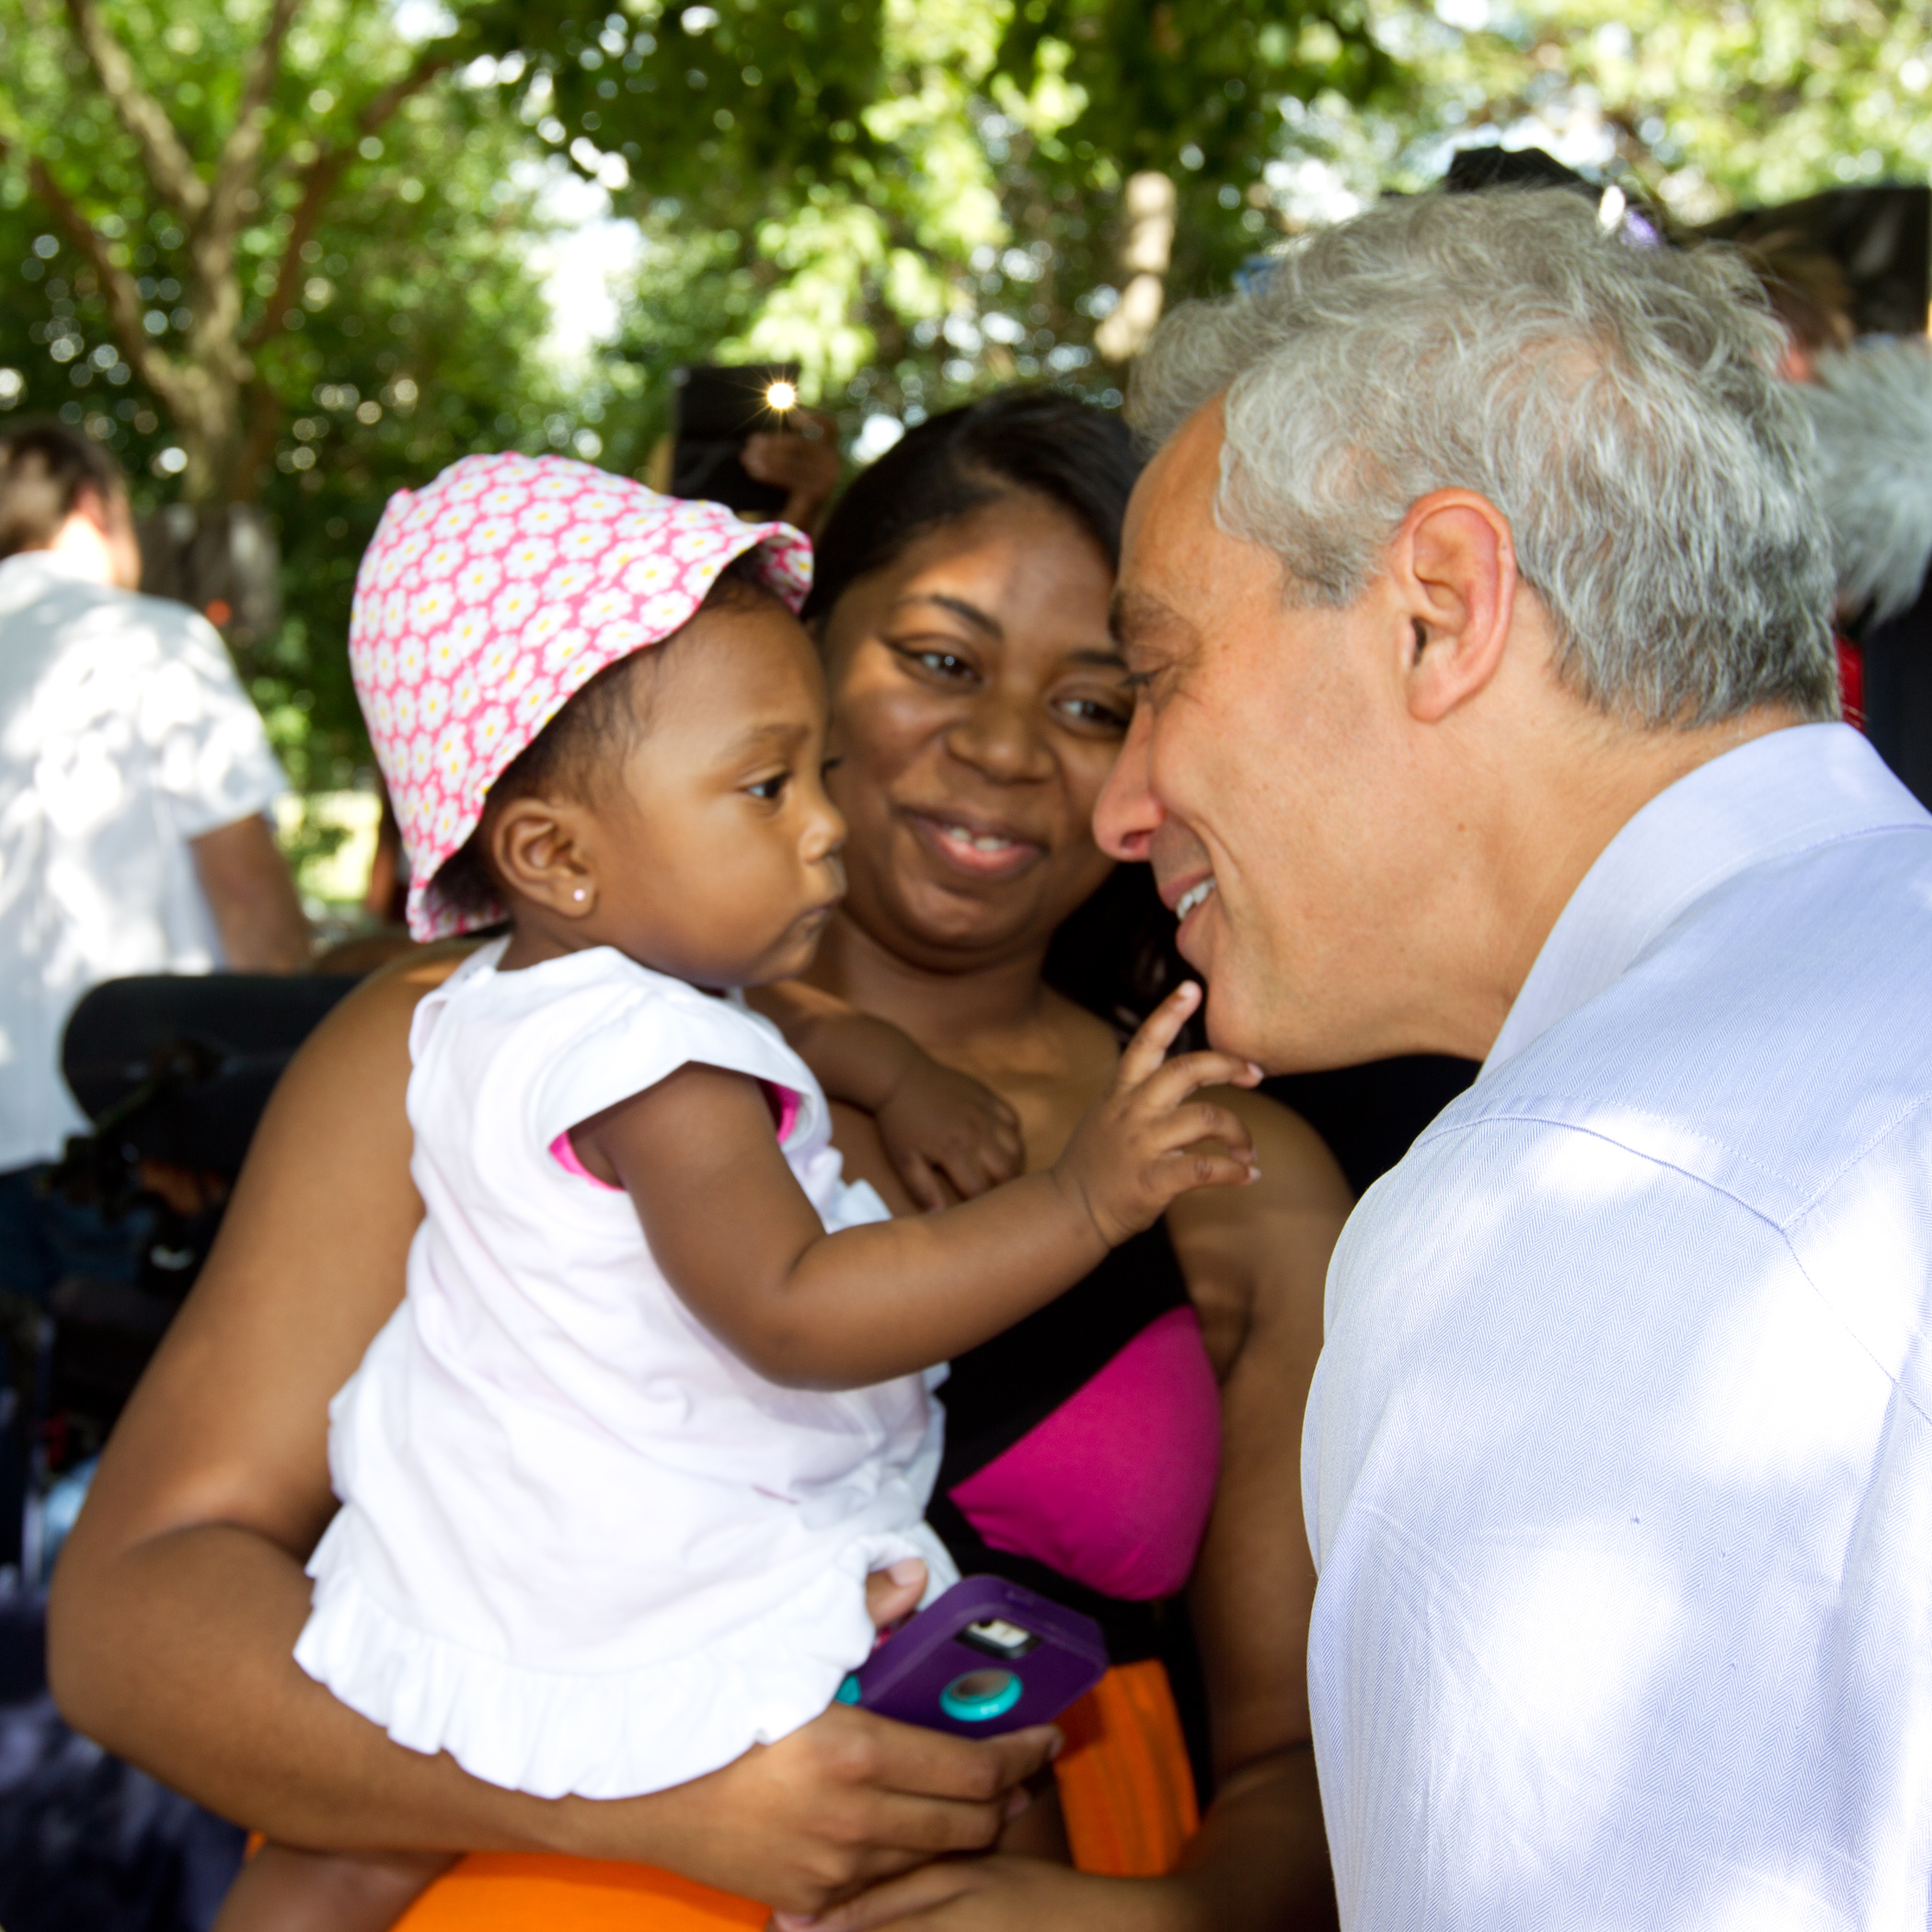 Mayor Emanuel joins Bronzeville community members as they cerebrate the opening of a new playground at Anderson Park.